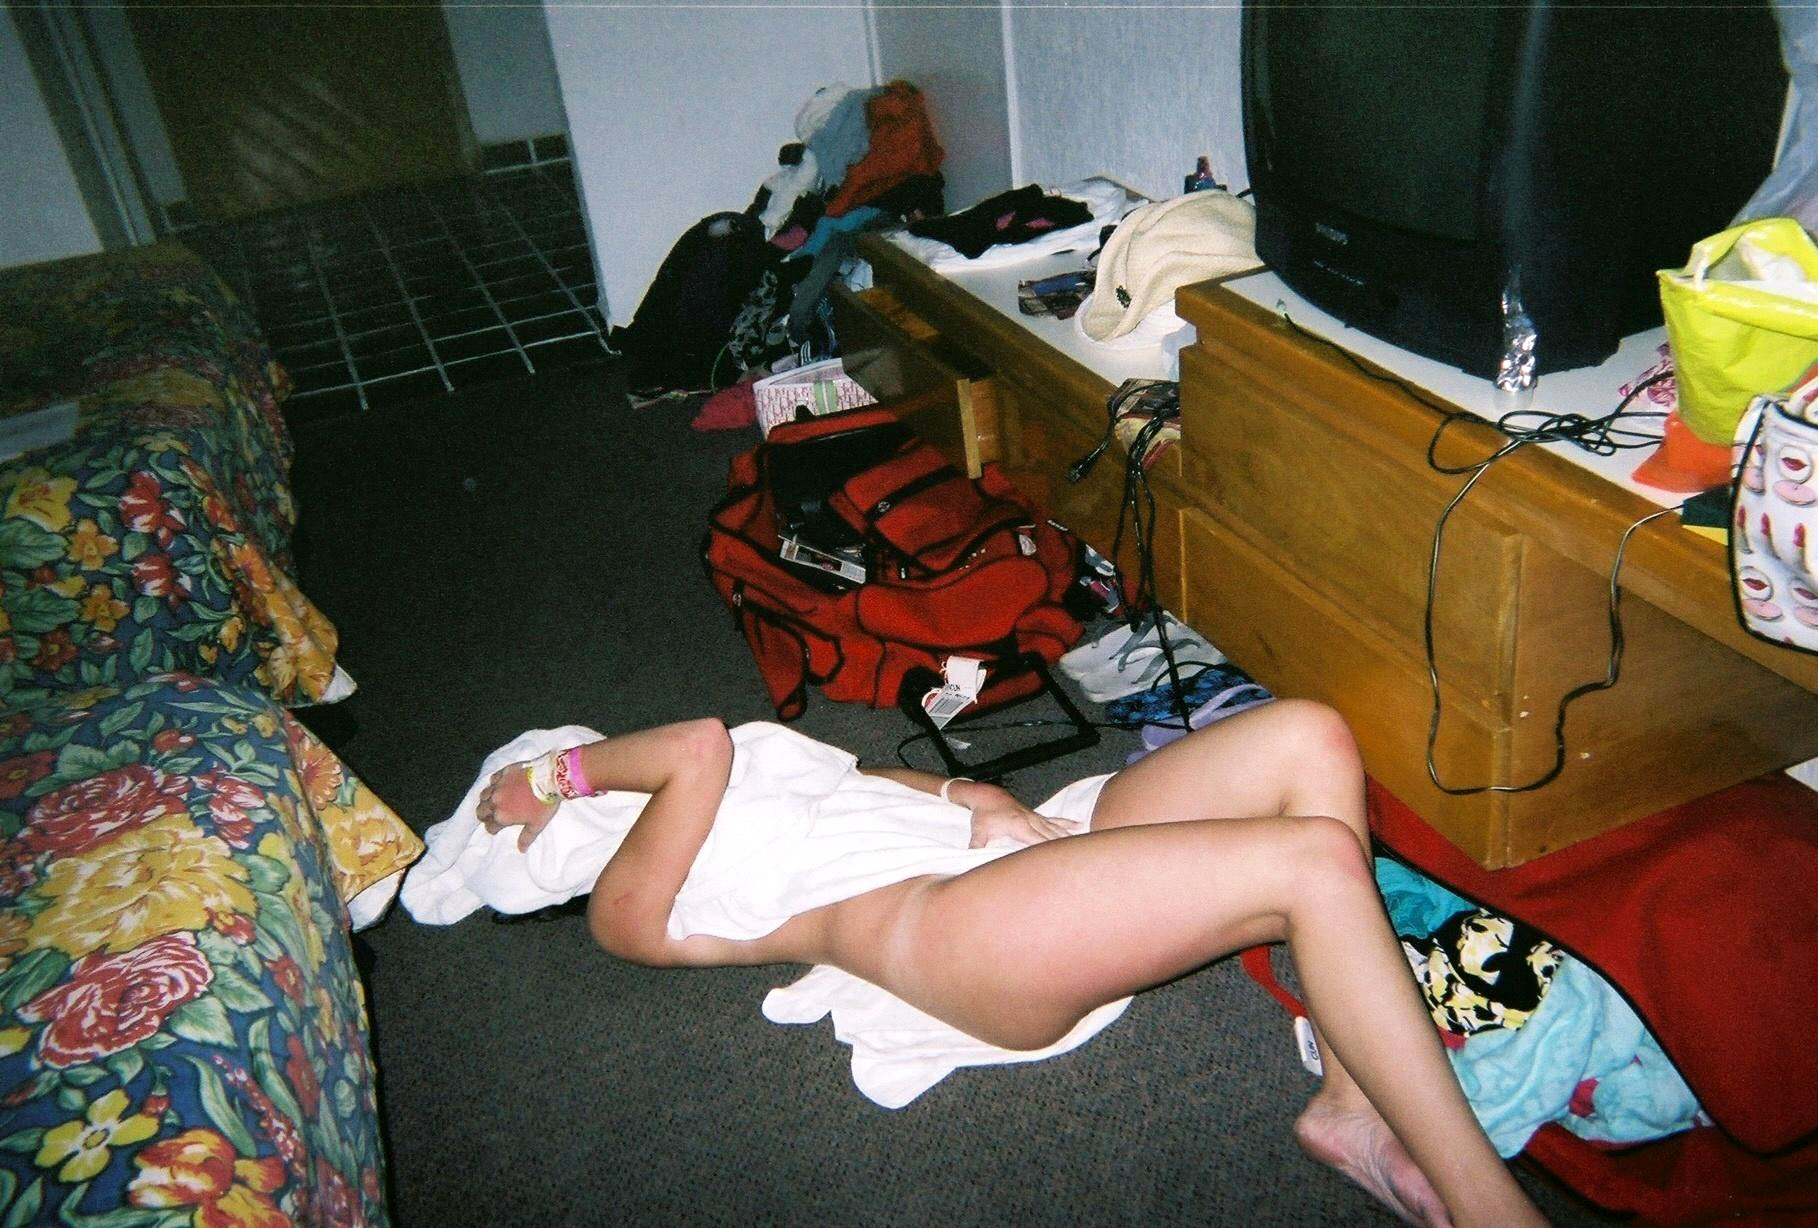 Trash sex parties of funny nude amateurs